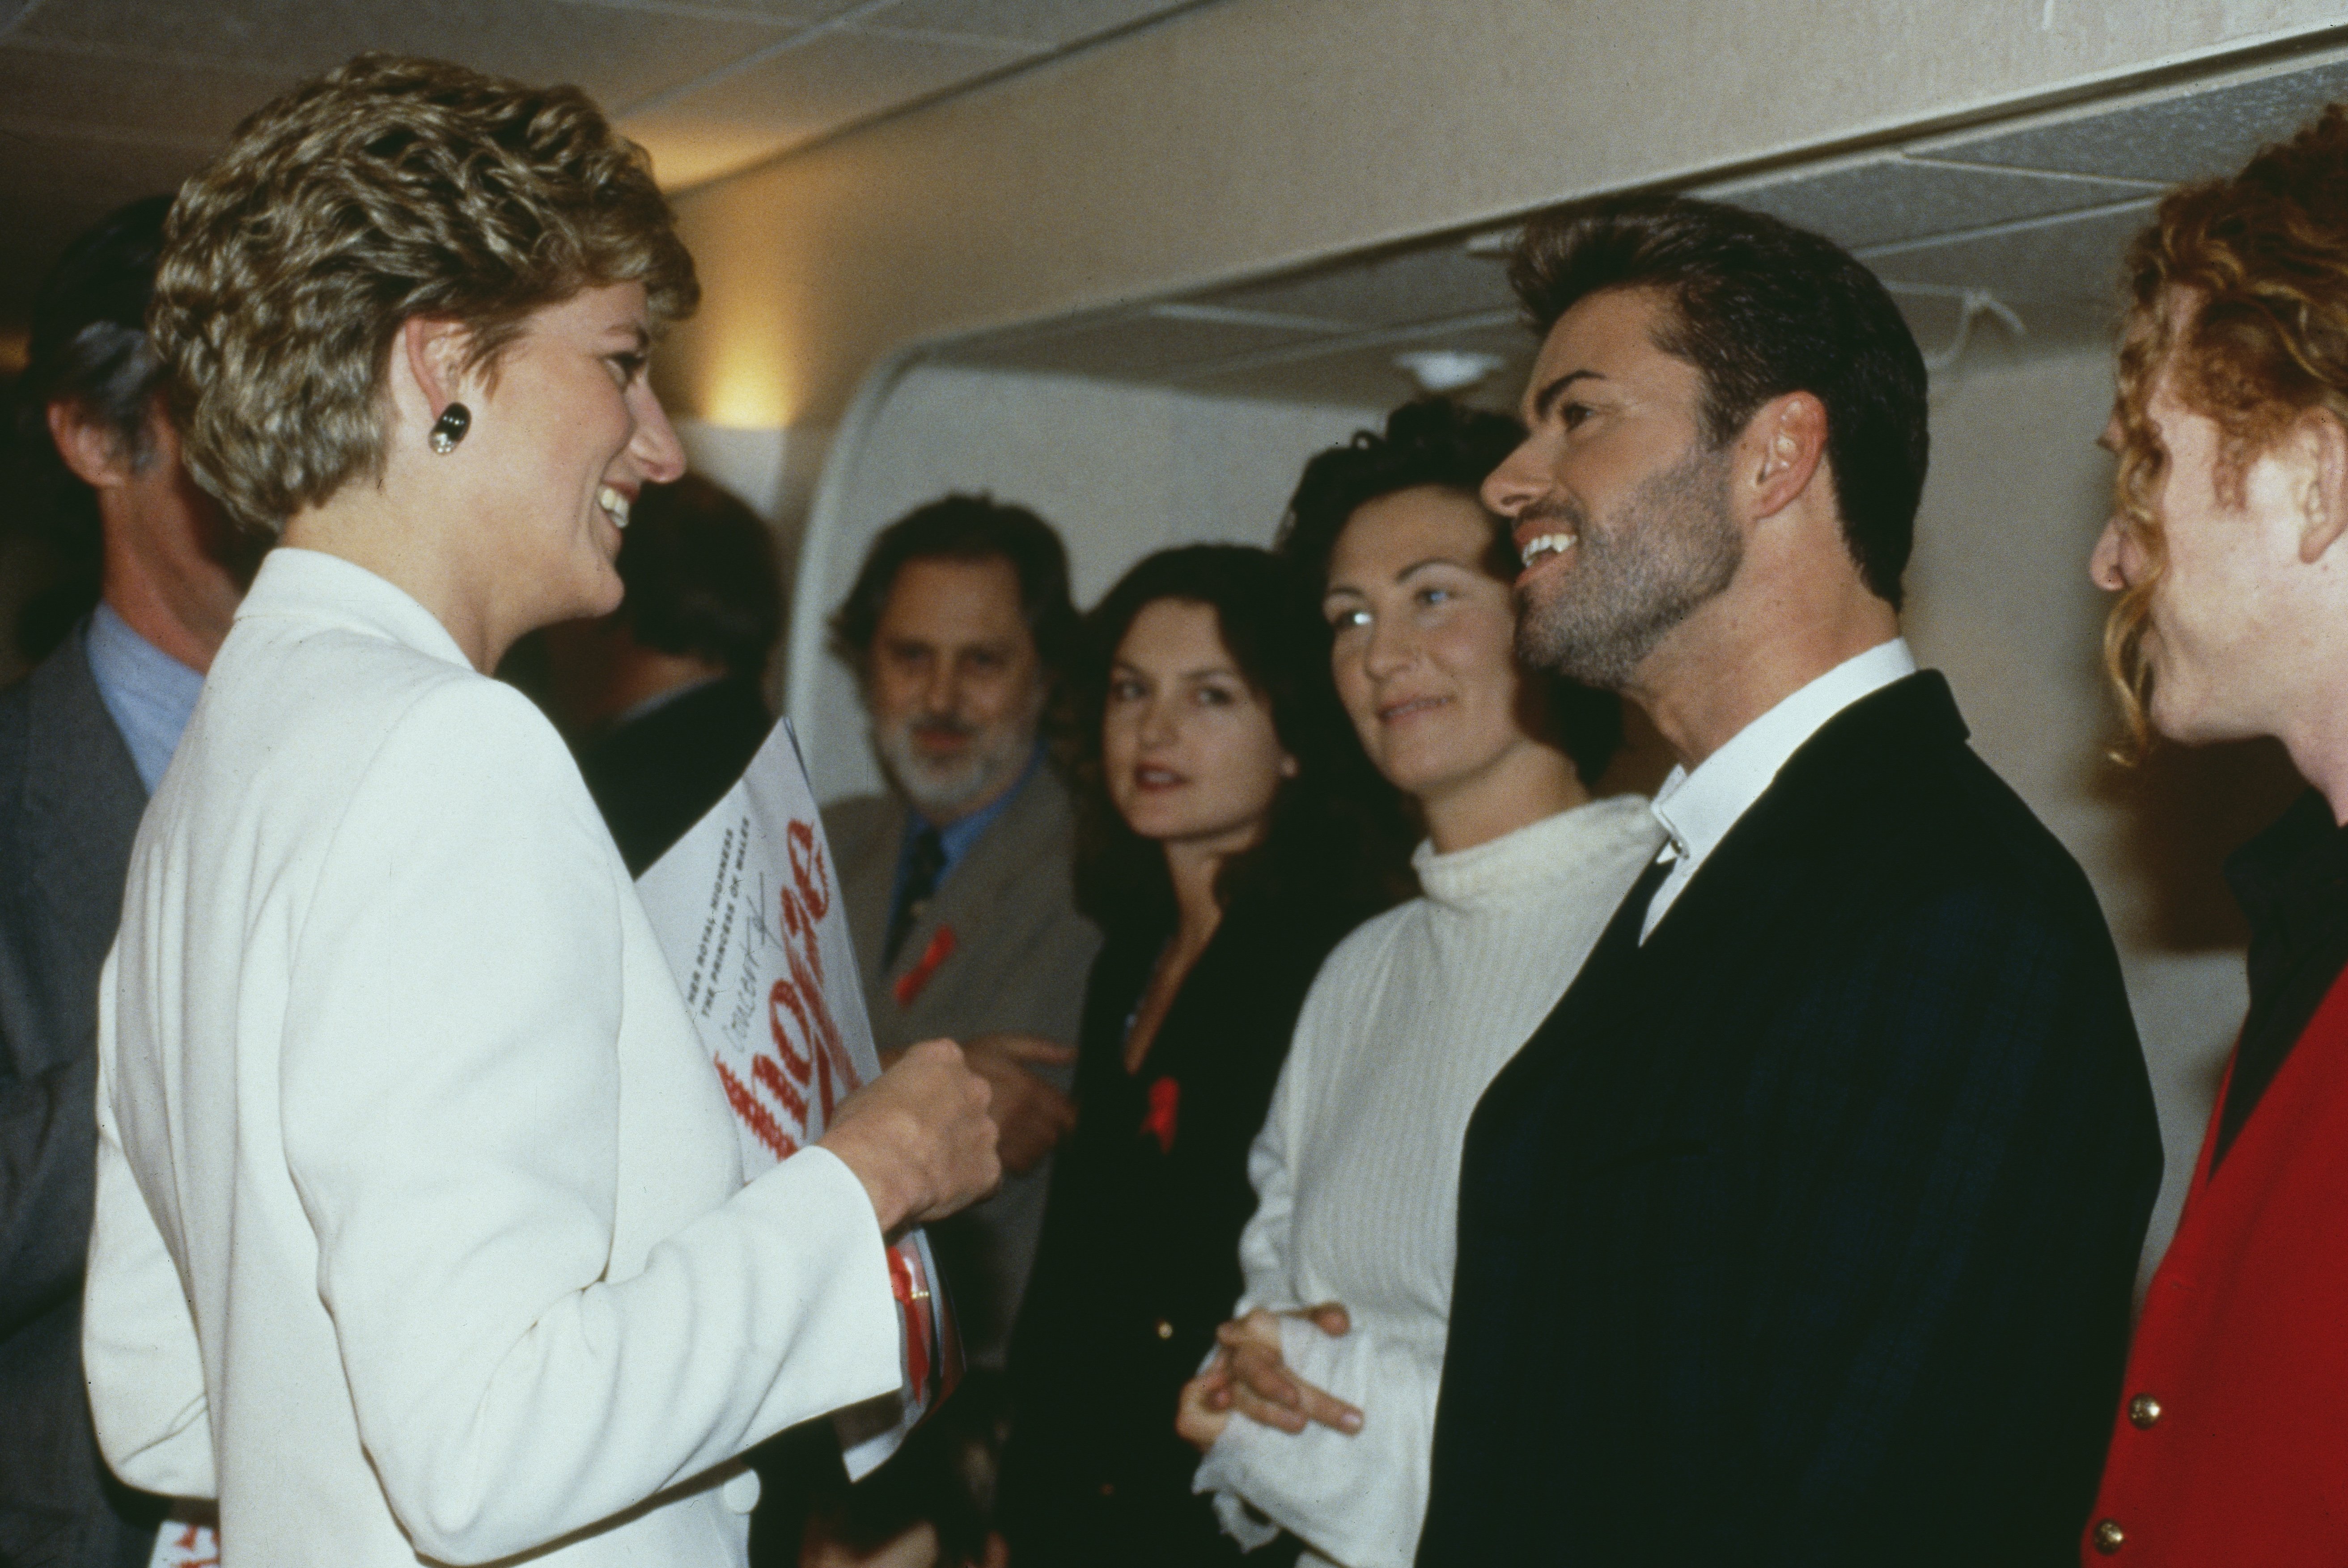 Princess Diana Meeting Pop Singers George Michael, Kd Lang And Mick Hucknall At The World Aids Day Annual "concert Of Hope" At Wembley Arena To Raise Funds For The Charity Crusaid On 1st December 1993 | Source: Getty Images